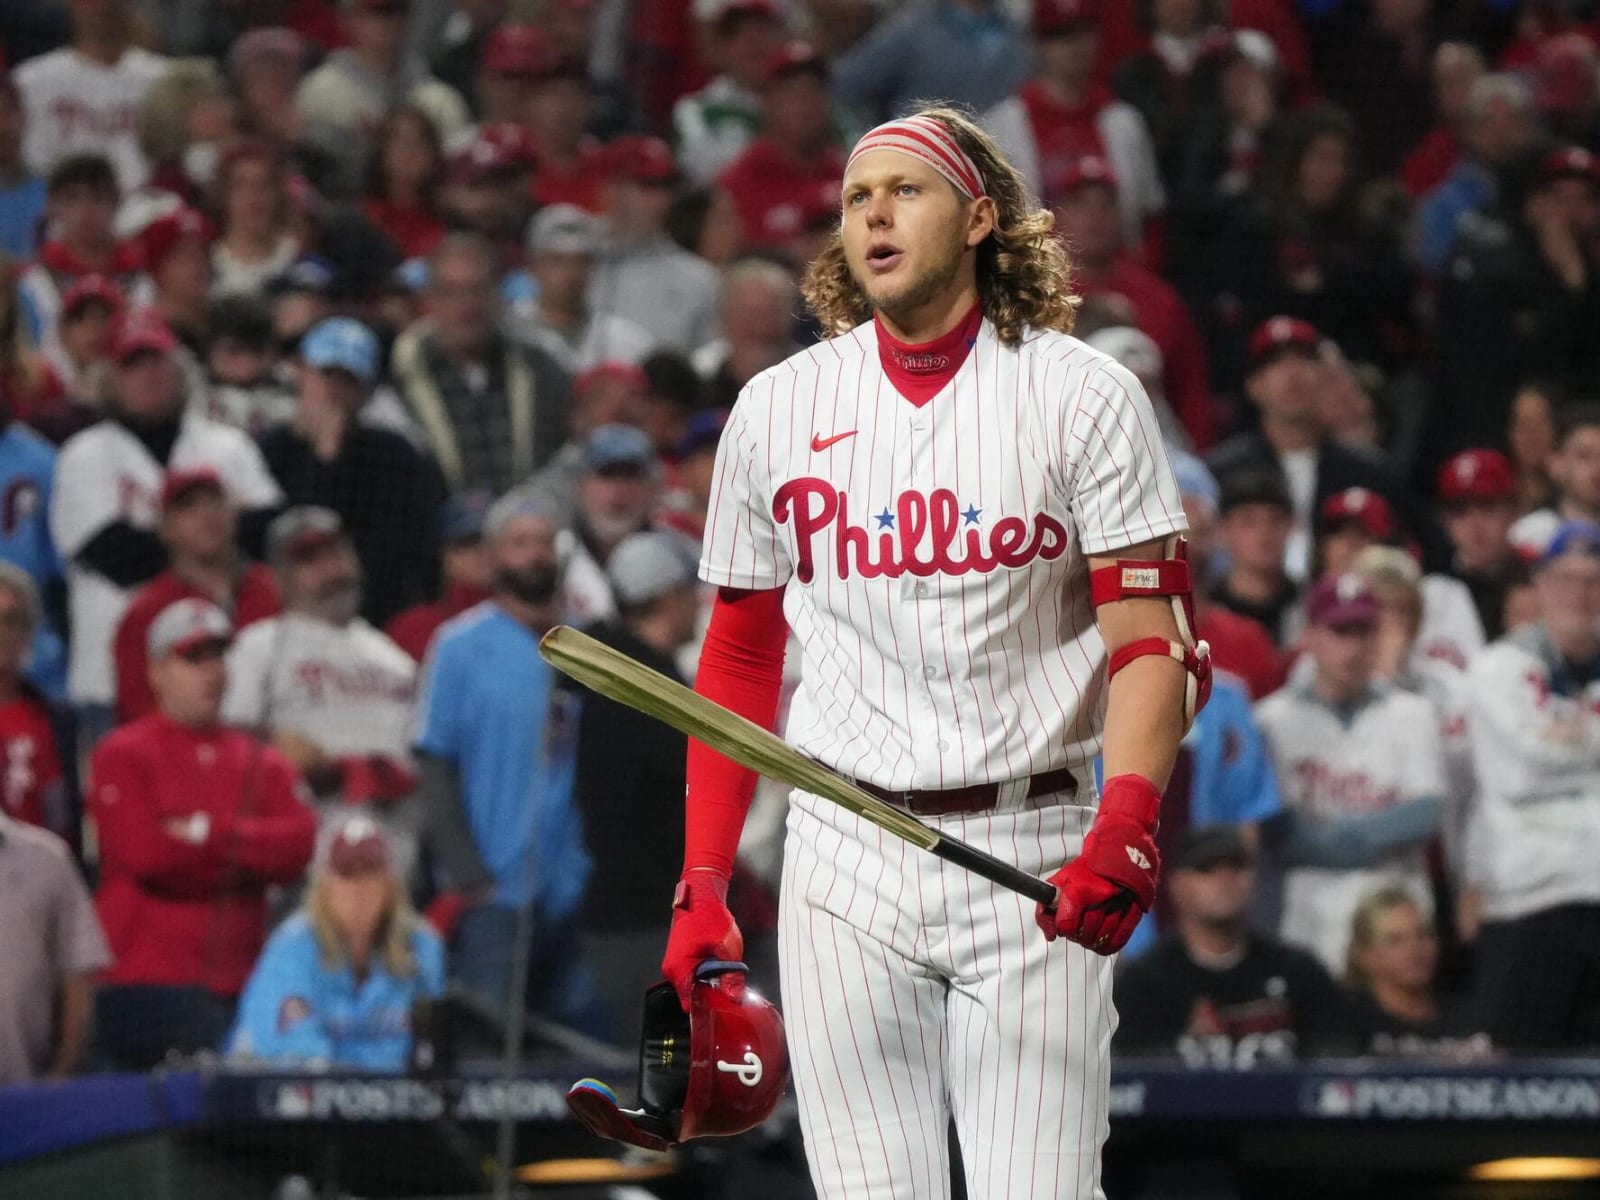 This Phillies fan proves you can catch a home run without dropping